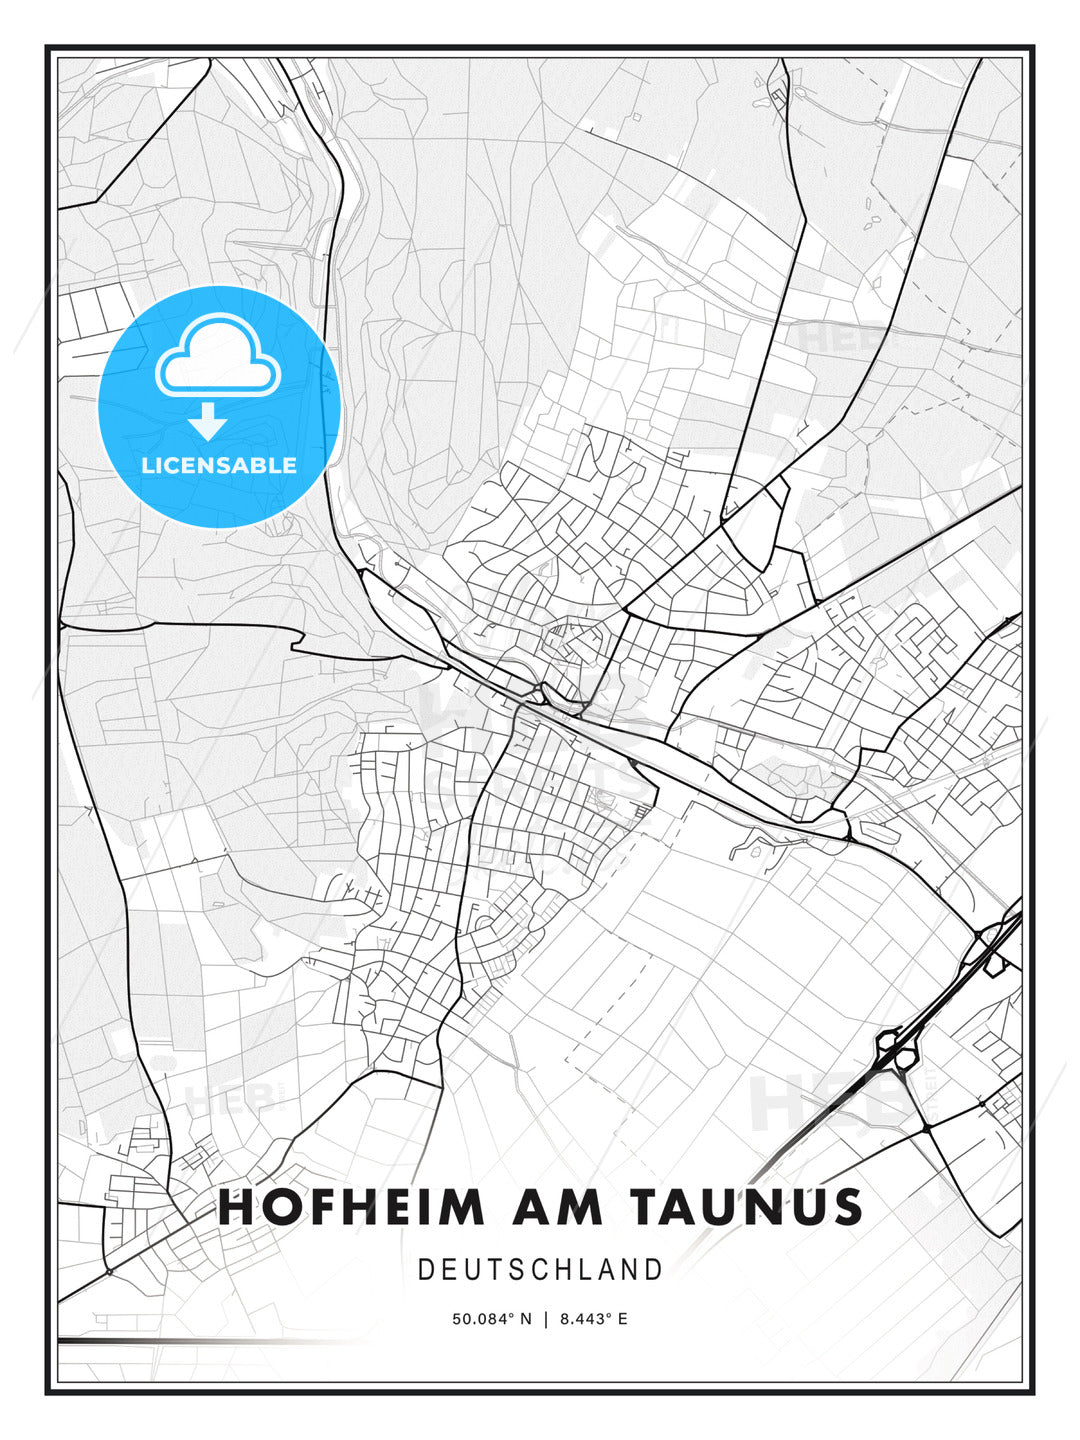 Hofheim am Taunus, Germany, Modern Print Template in Various Formats - HEBSTREITS Sketches